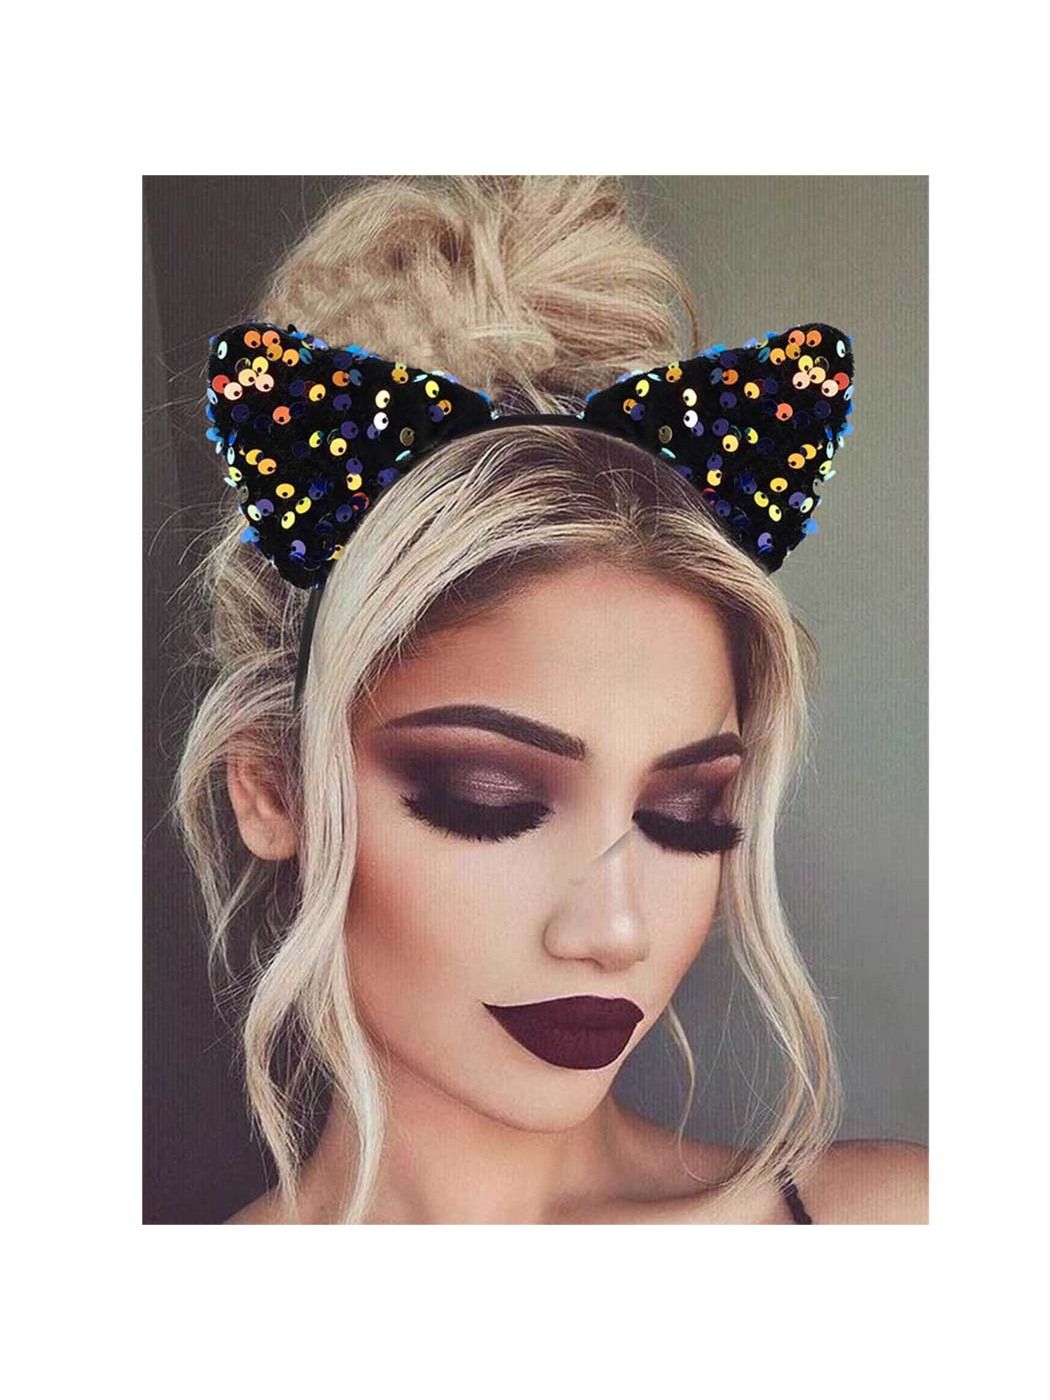 Embellished Cat Ears For
  Halloween